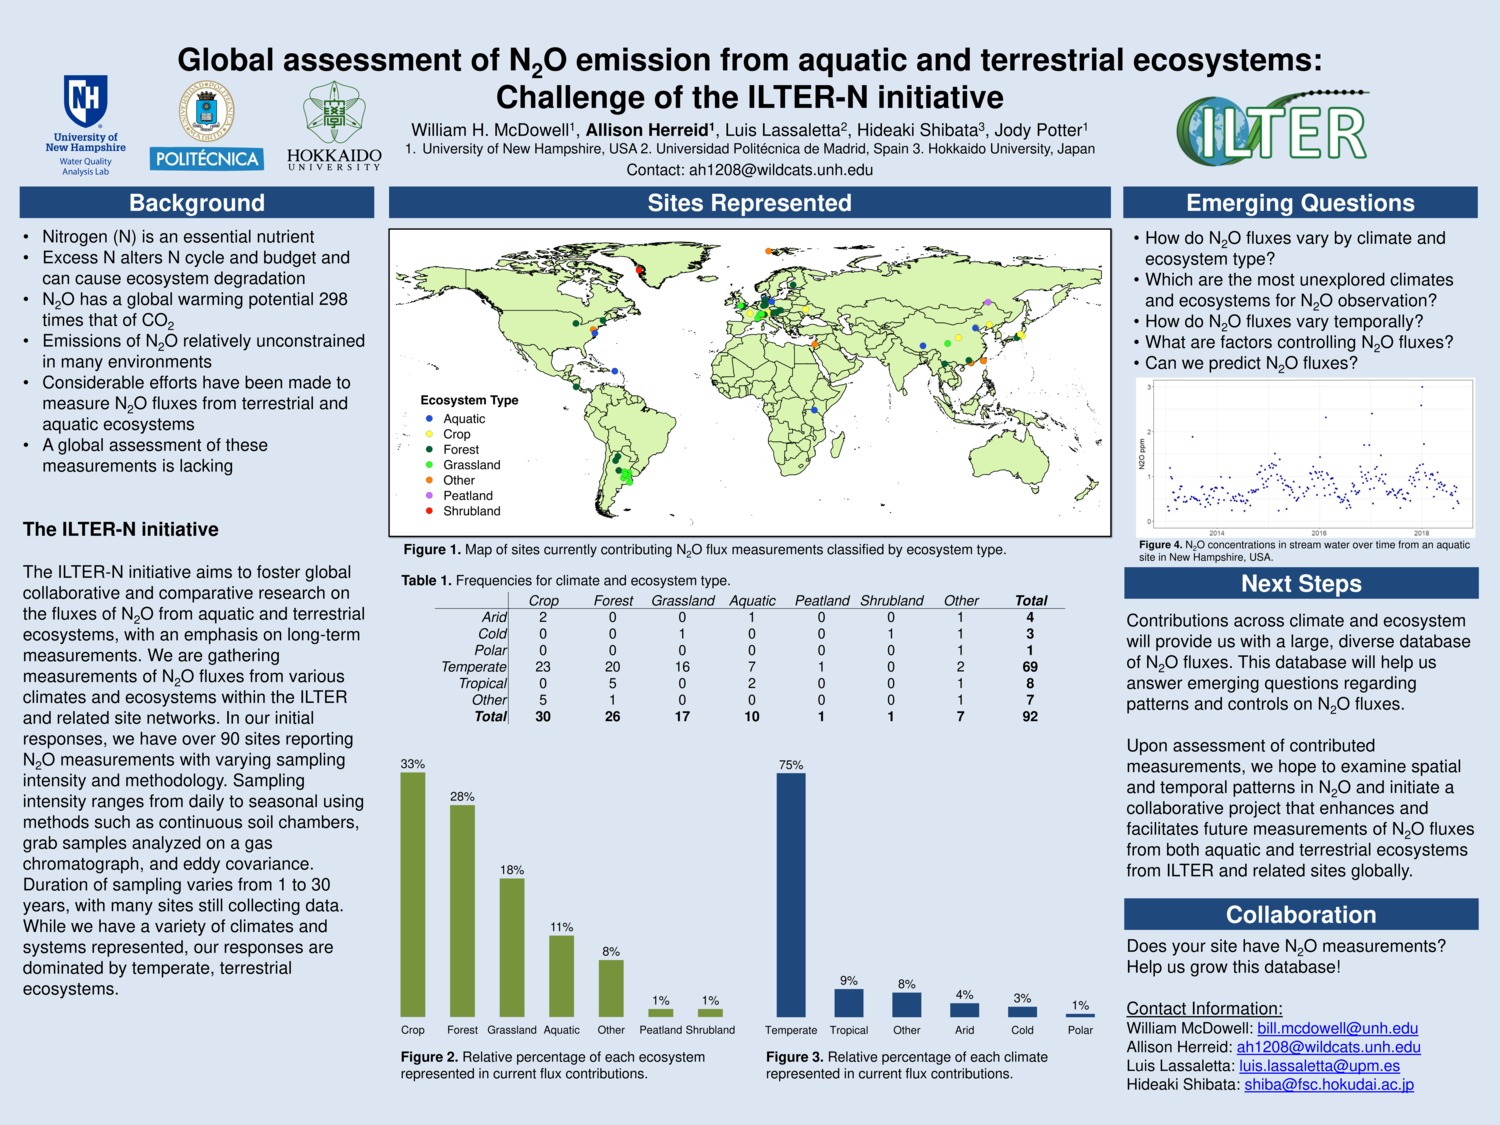 Global Assessment Of N2o Emission From Aquatic And Terrestrial Ecosystems: Challenge Of The Ilter-N Initiative by ah1208